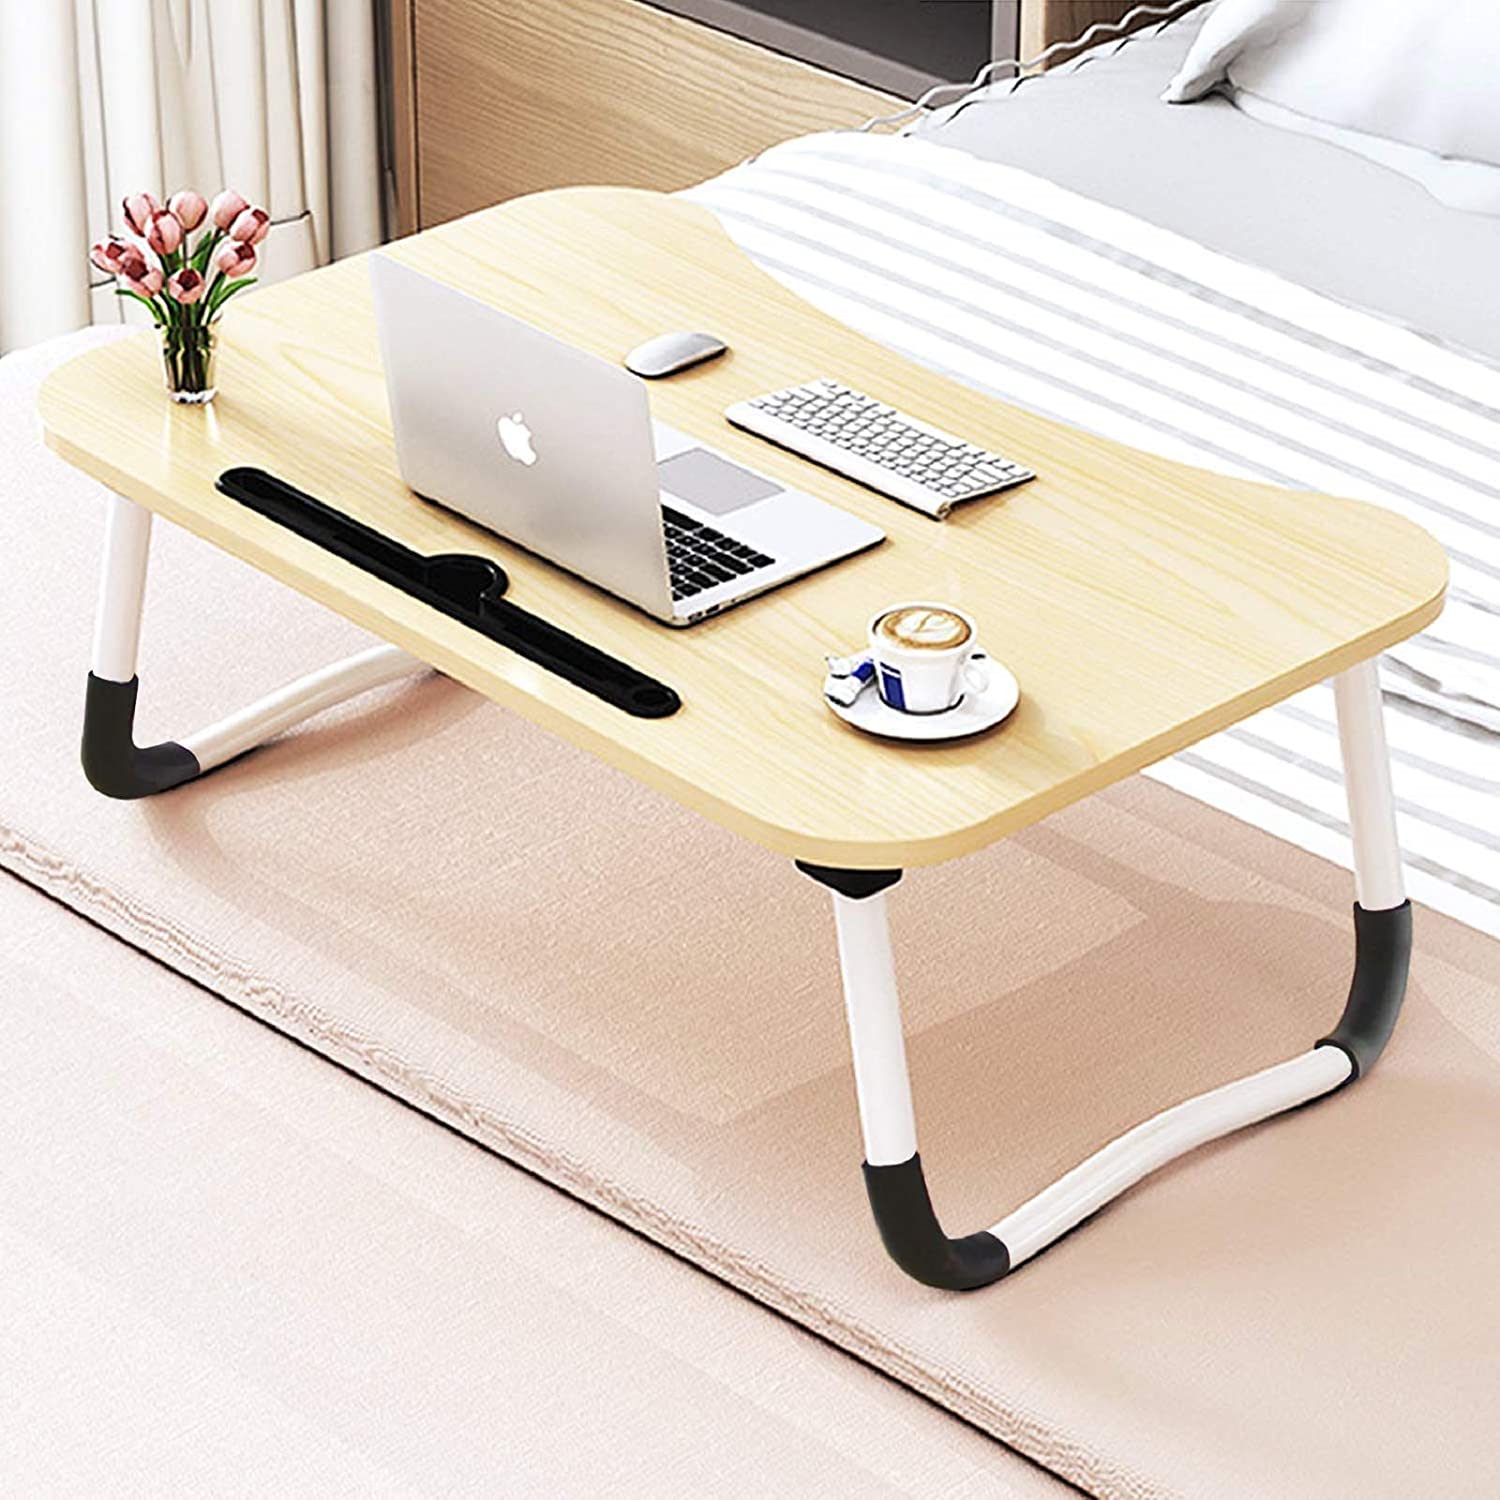 JIIKOOAI Curved Folding Tray For Bed